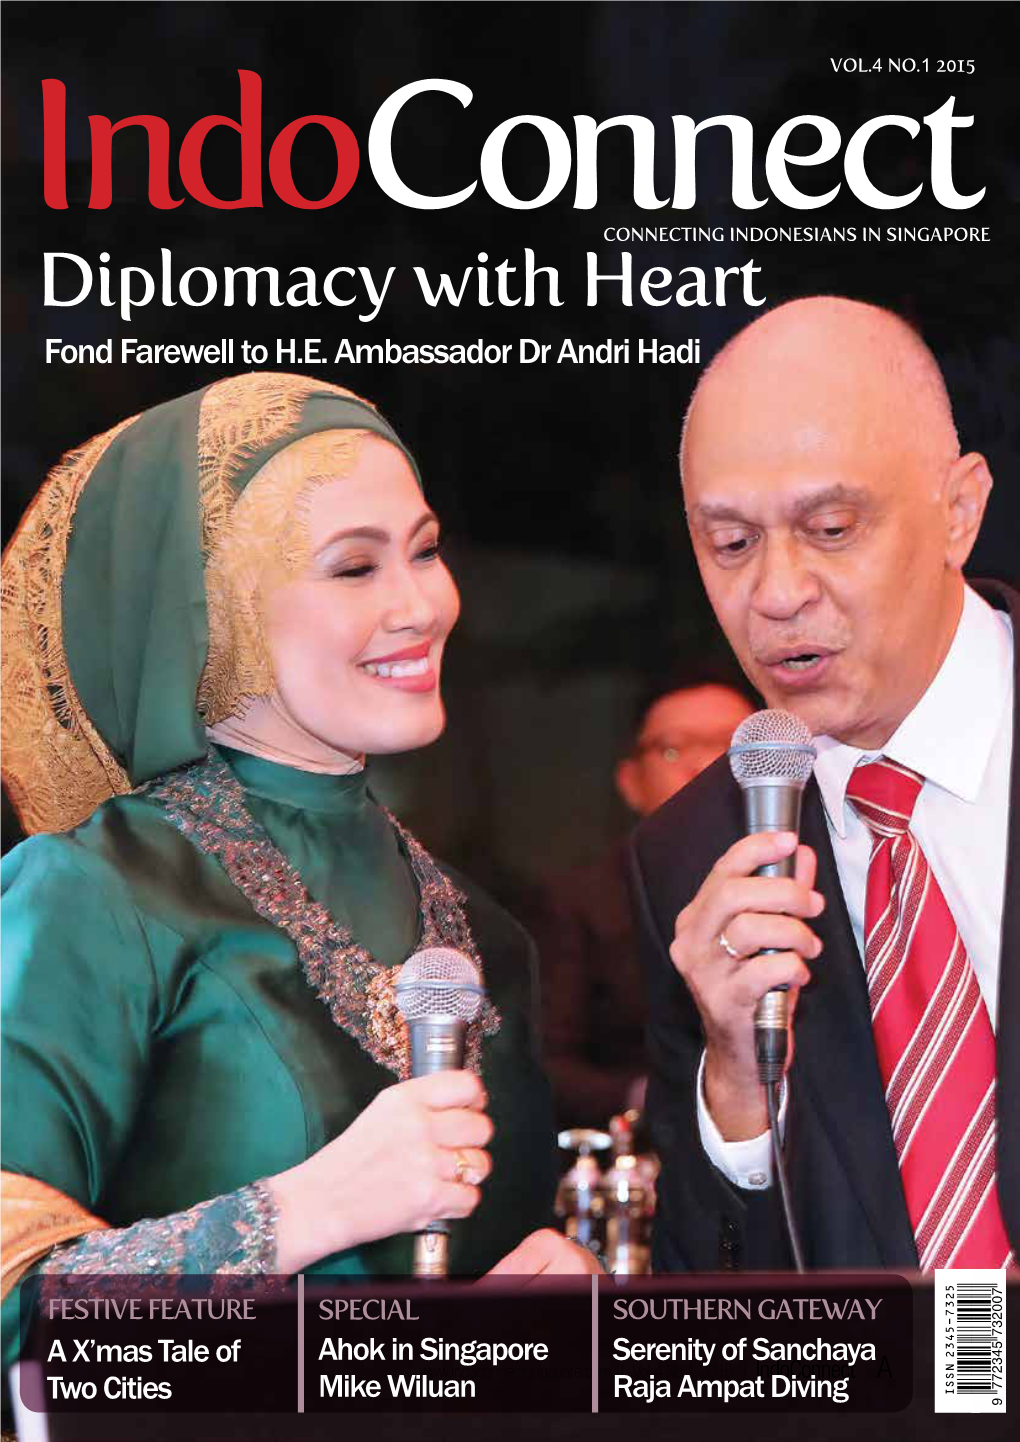 Indoconnectconnecting Indonesians in SINGAPORE Diplomacy with Heart Fond Farewell to H.E